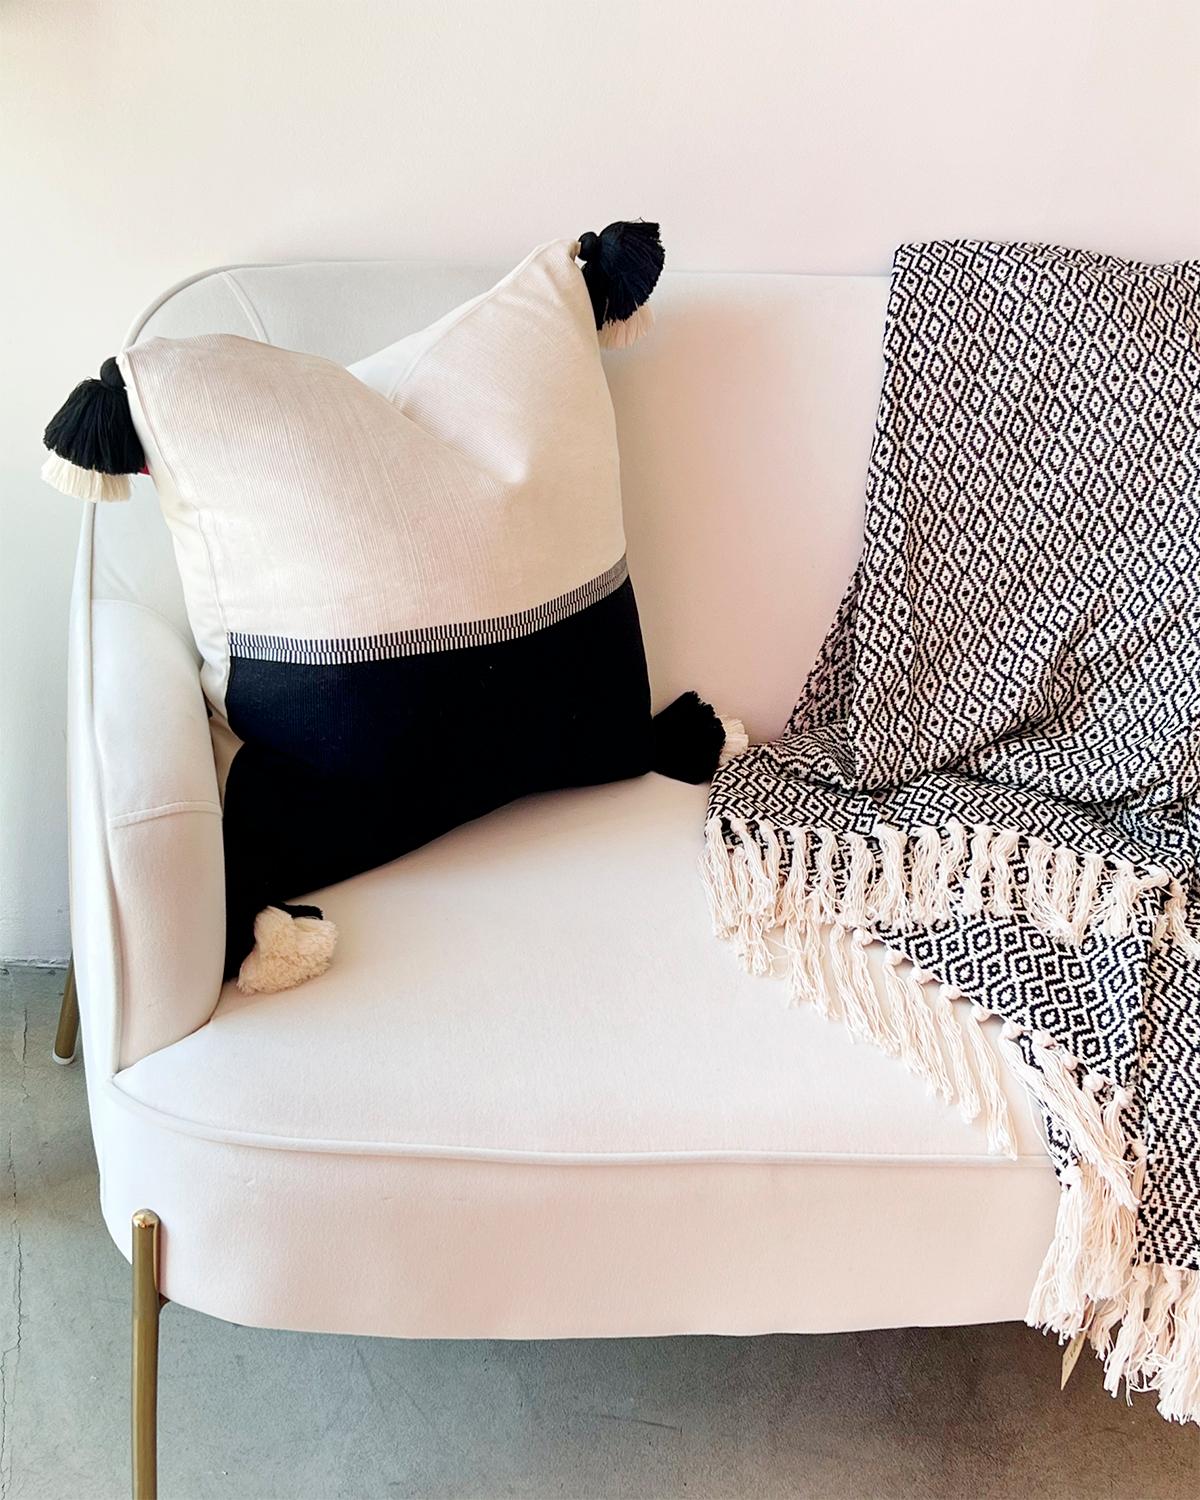 This black and white lumbar decor pillow was hand woven on back strap looms in Peru out of 100% Pima cotton. Finding the right throw pillow for the couch in your living room or the bed in your bedroom can be tricky, but we have a whimsical solution